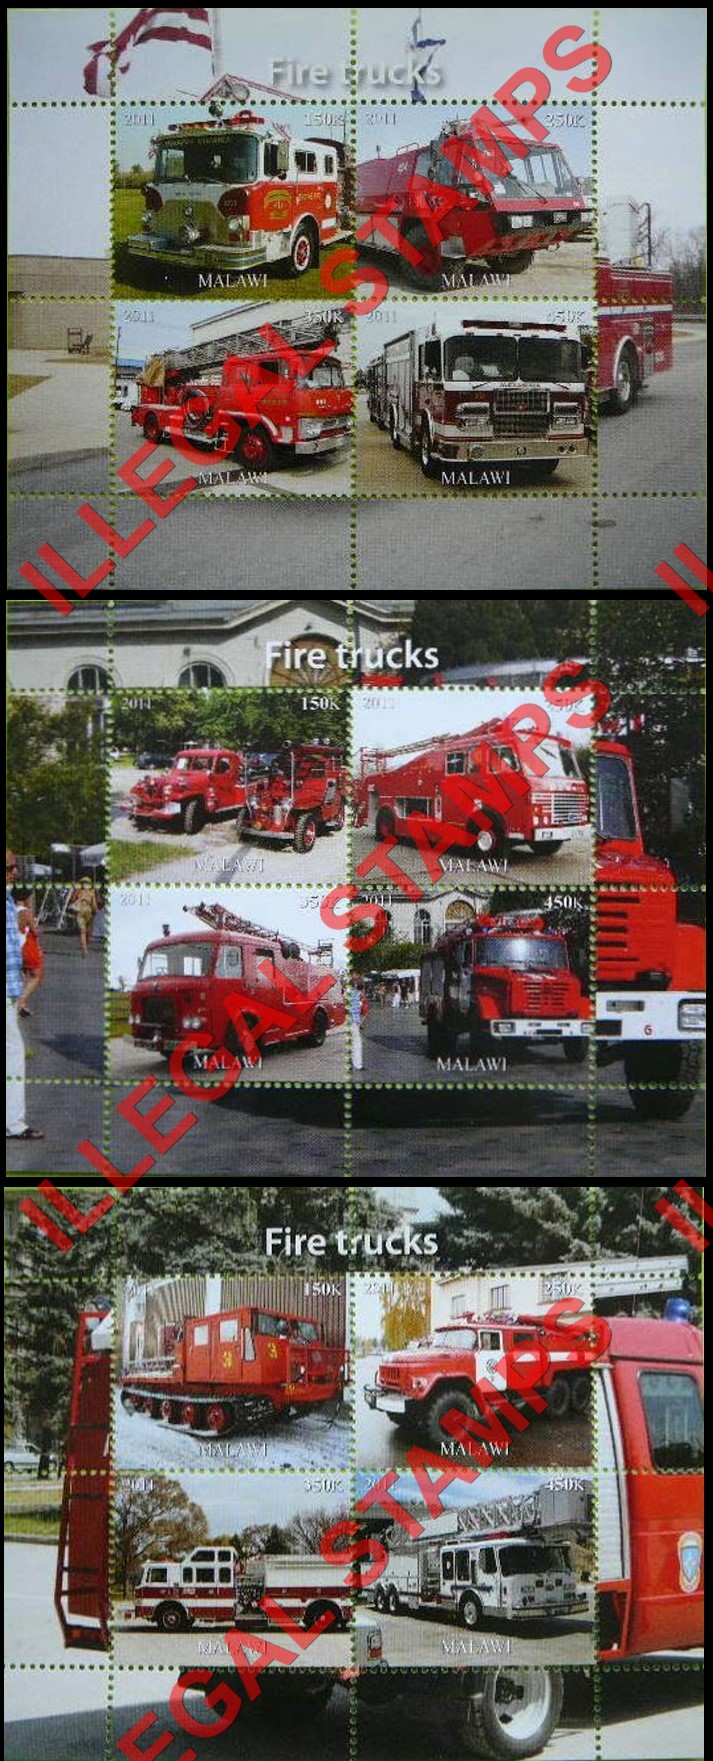 Malawi 2011 Fire Trucks Illegal Stamp Souvenir Sheets of 4